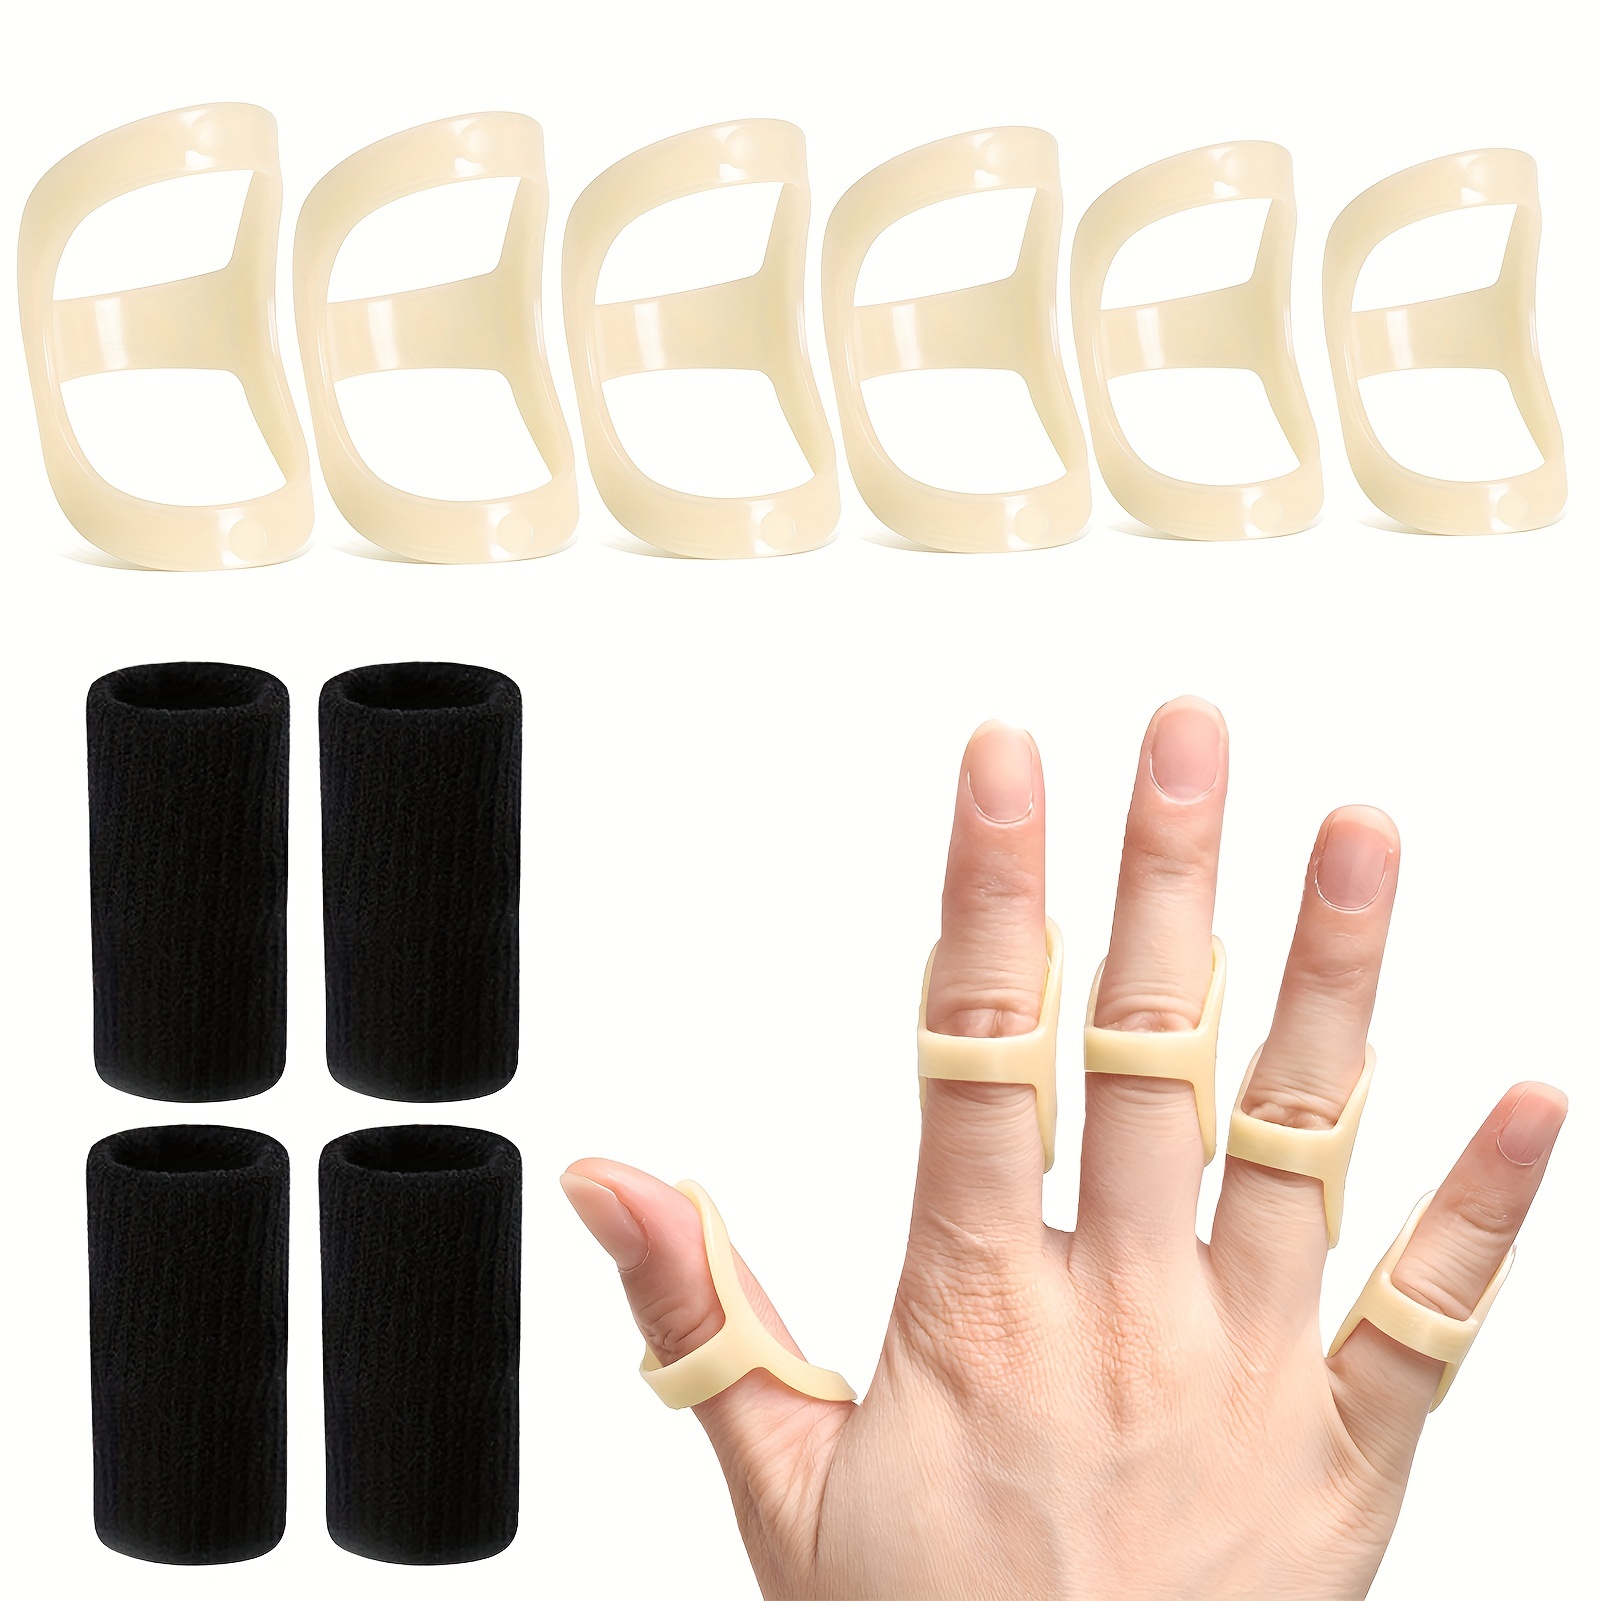 Generic Sumifun Finger Sleeves, 10 PCS Gel Finger Protector for